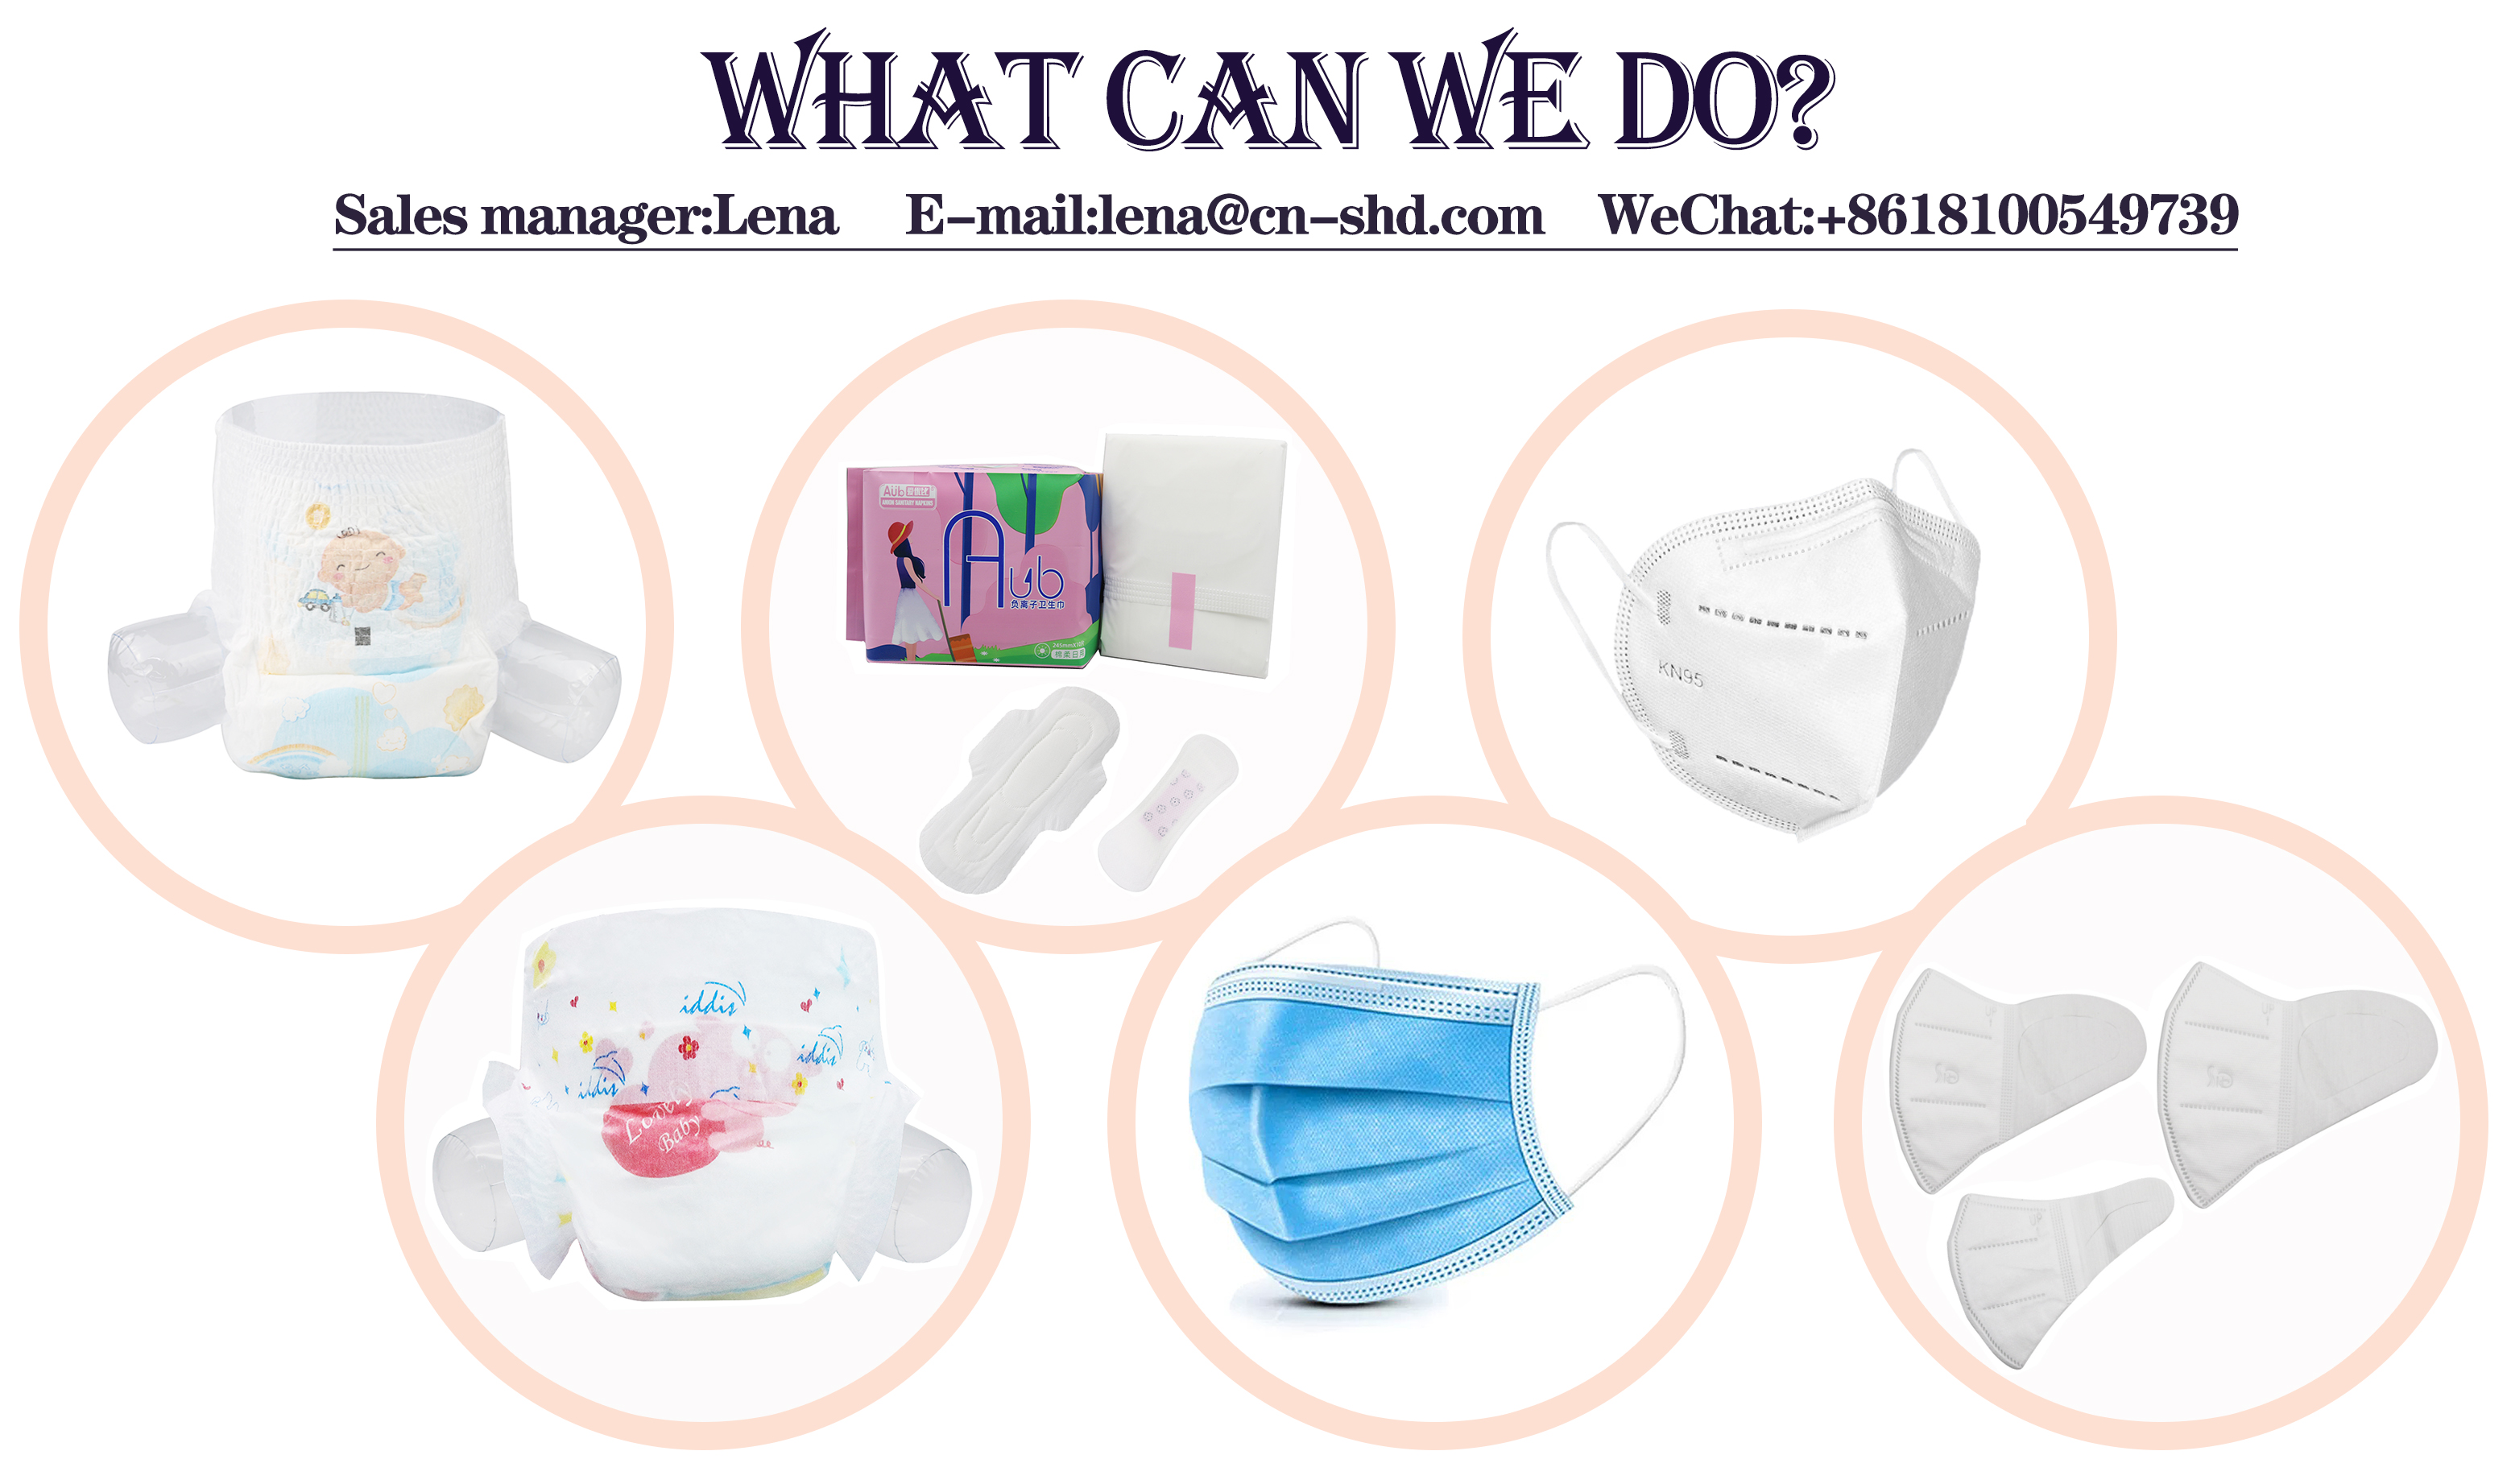 Bamboo fiber sanitary napkins are environmentally friendly and can inhibit bacteria effectively